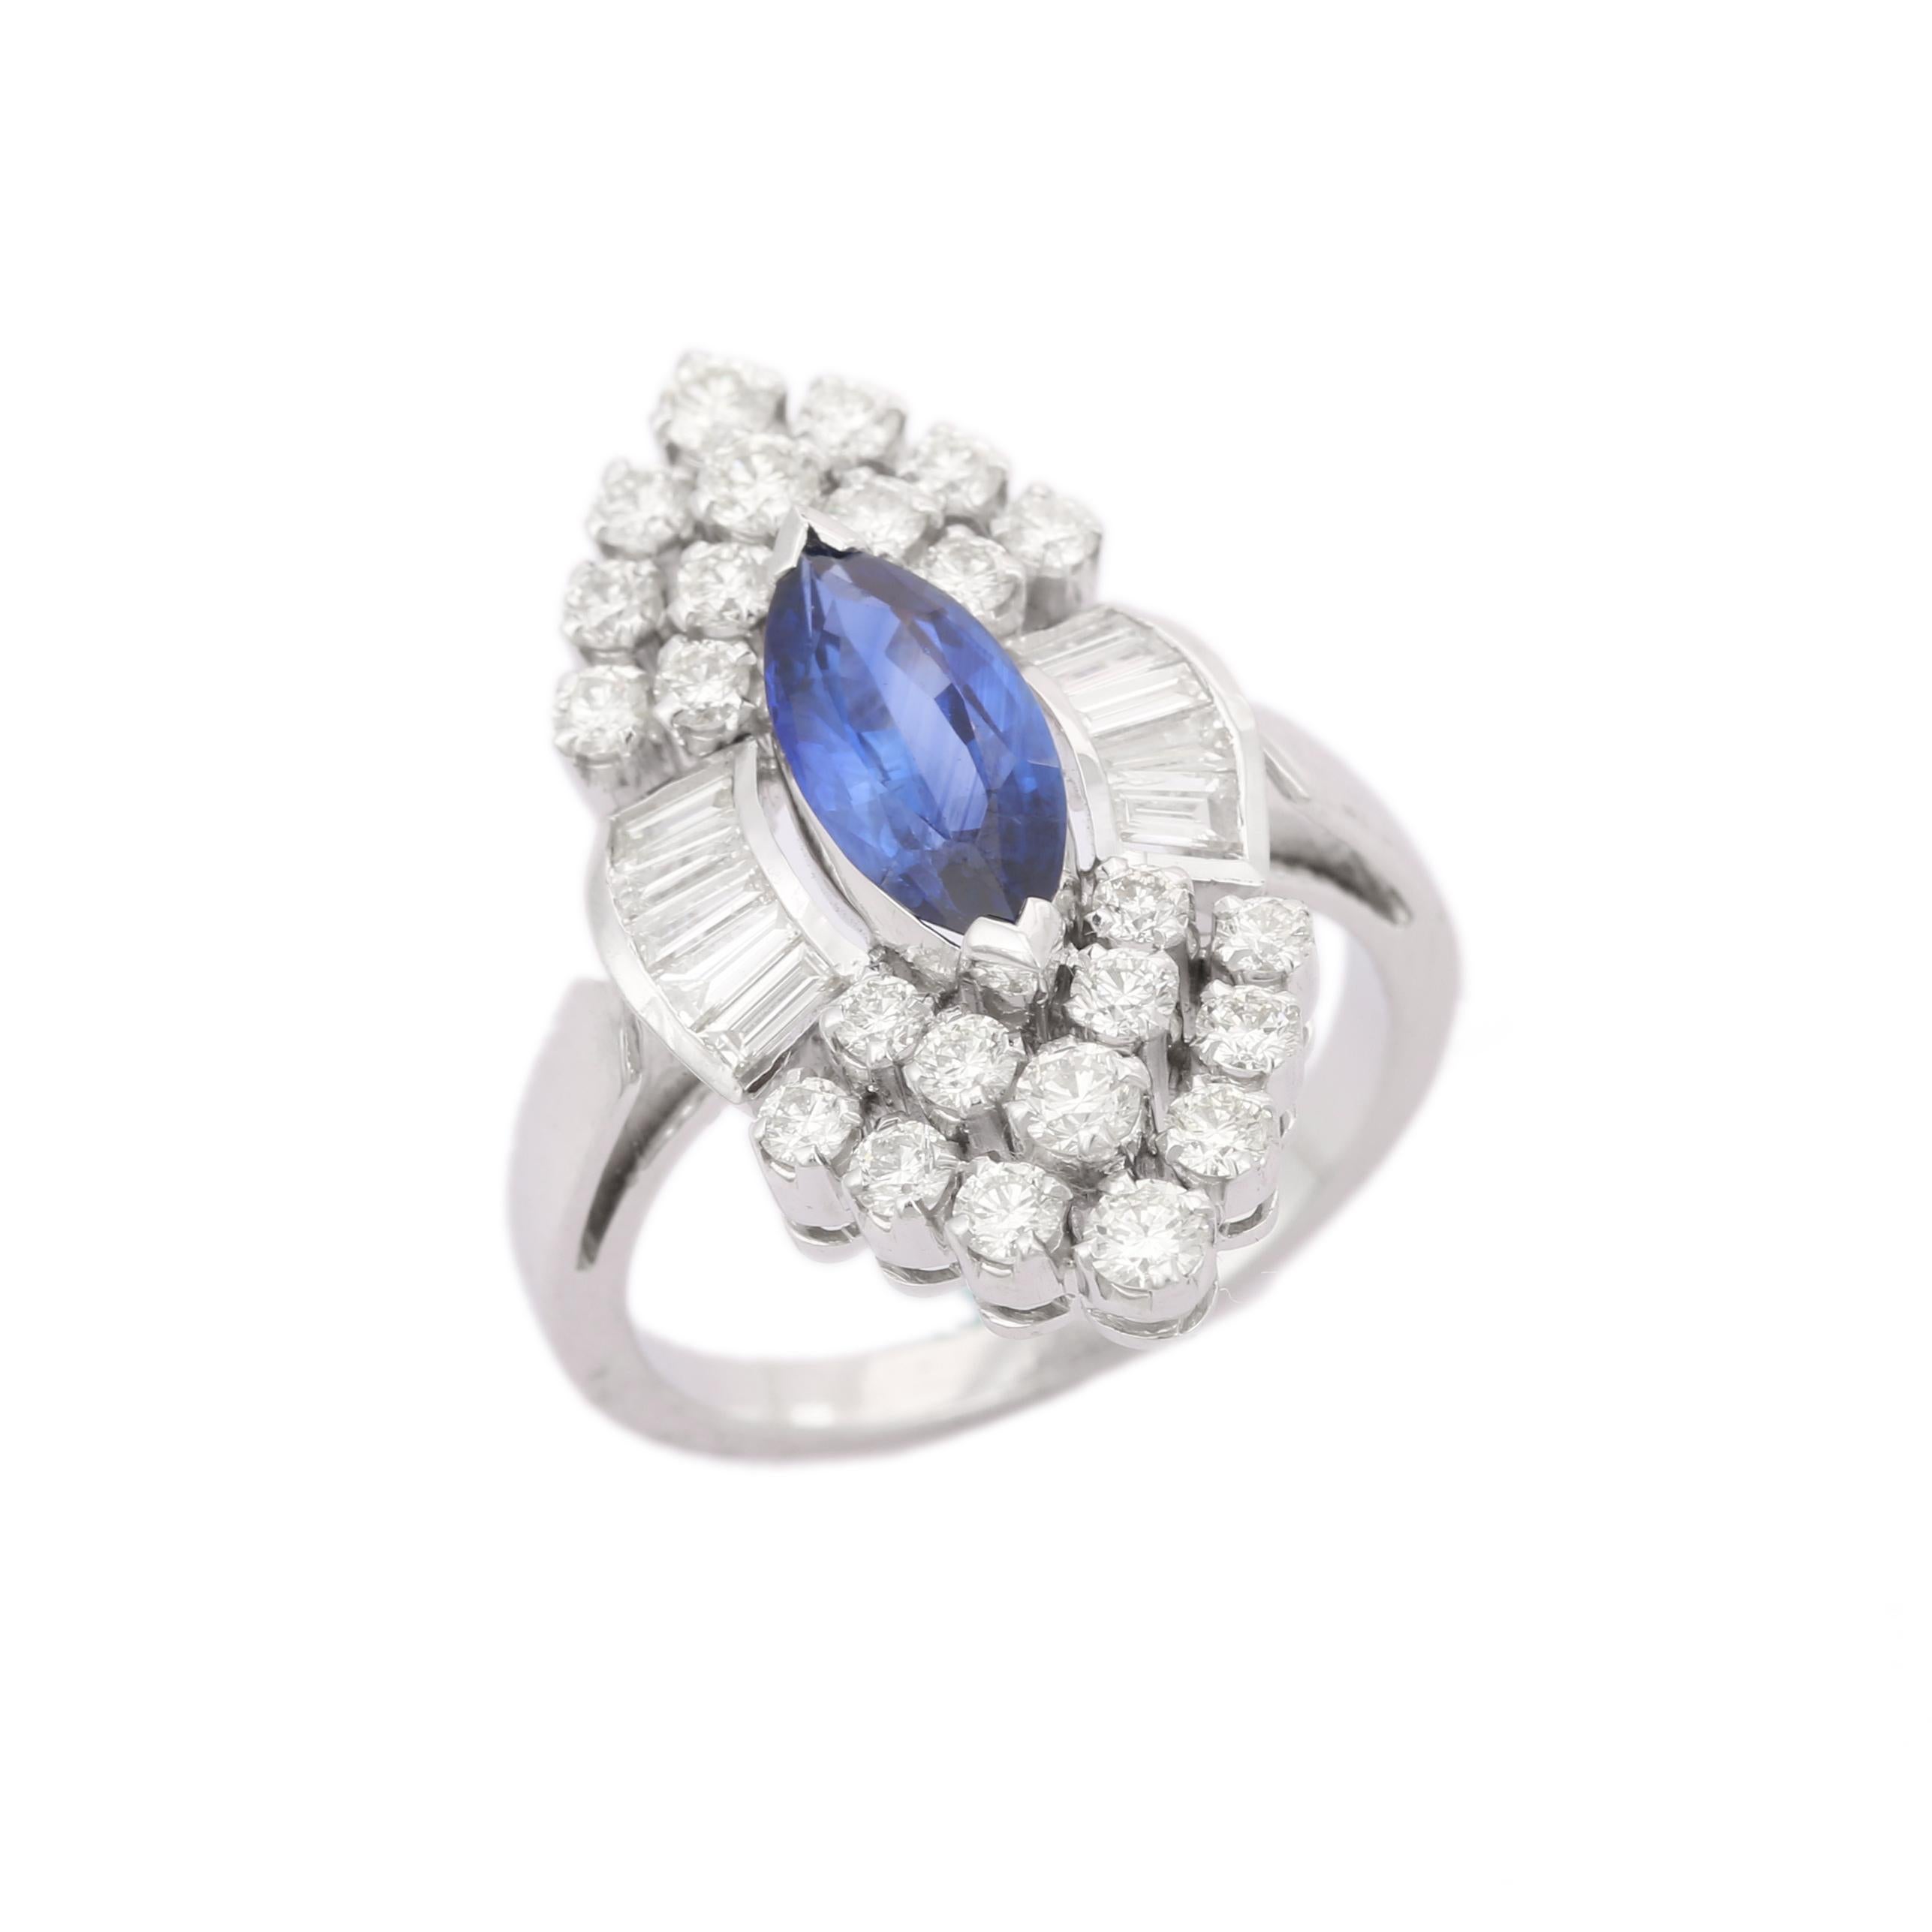 For Sale:  18kt Solid White Gold Marquise Blue Sapphire Diamond Wedding Ring 6